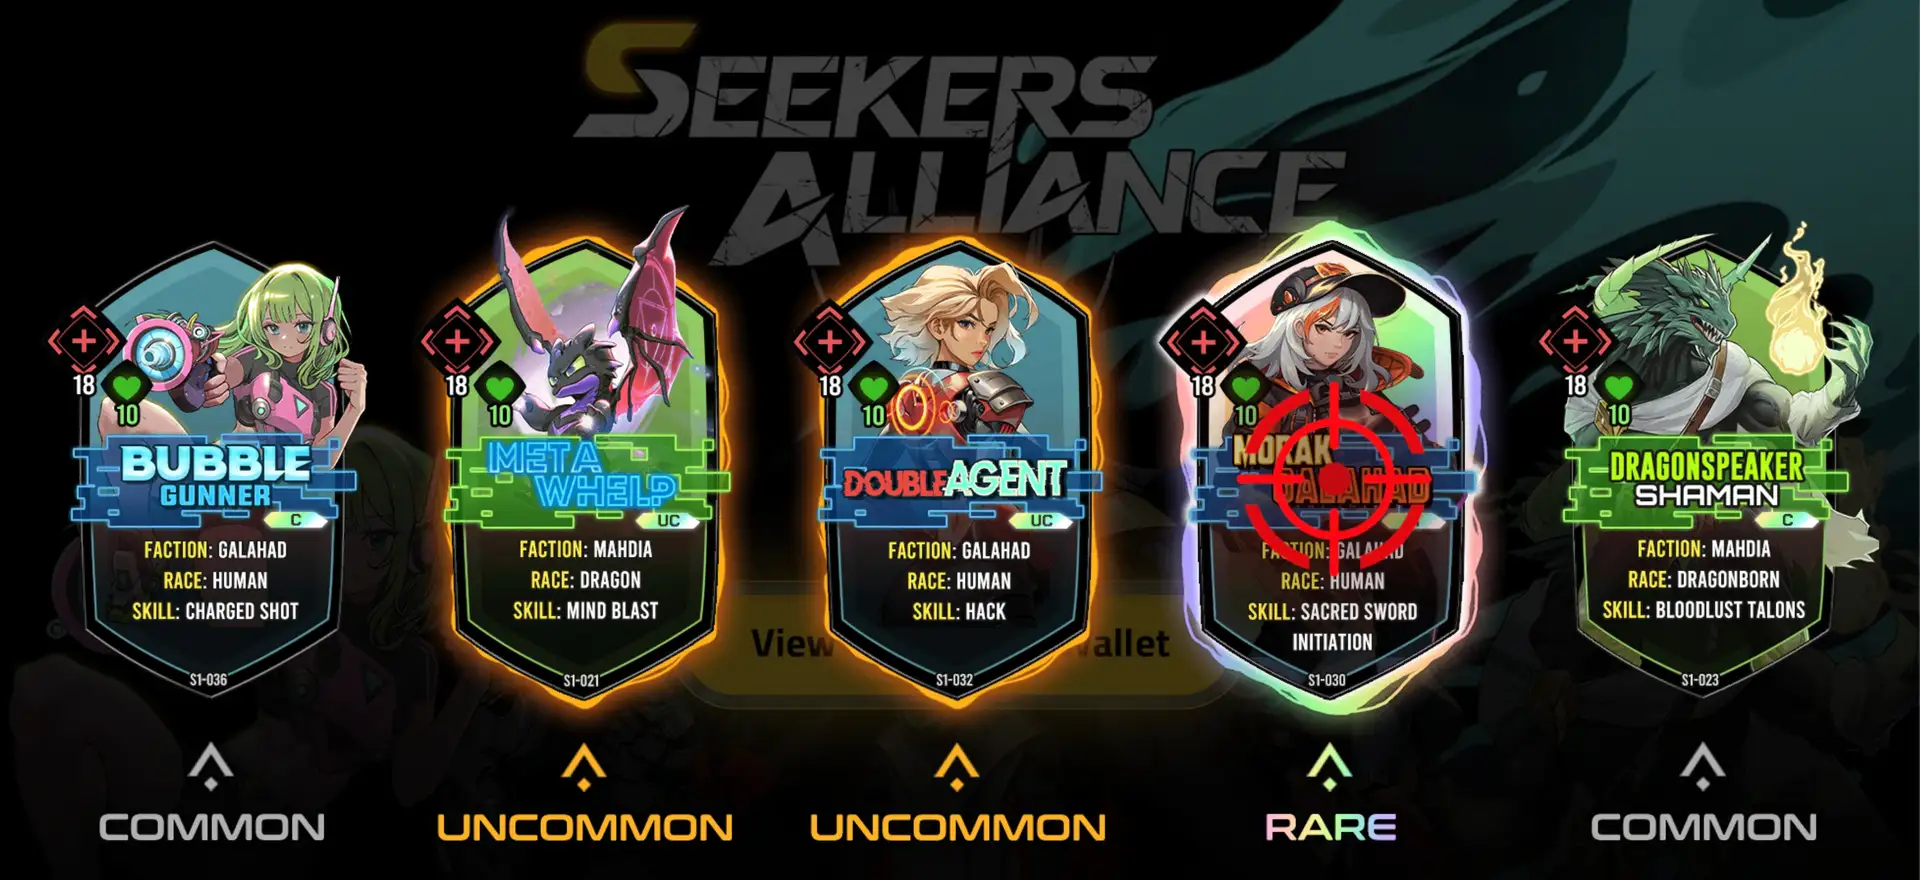 Seekers Alliance Review